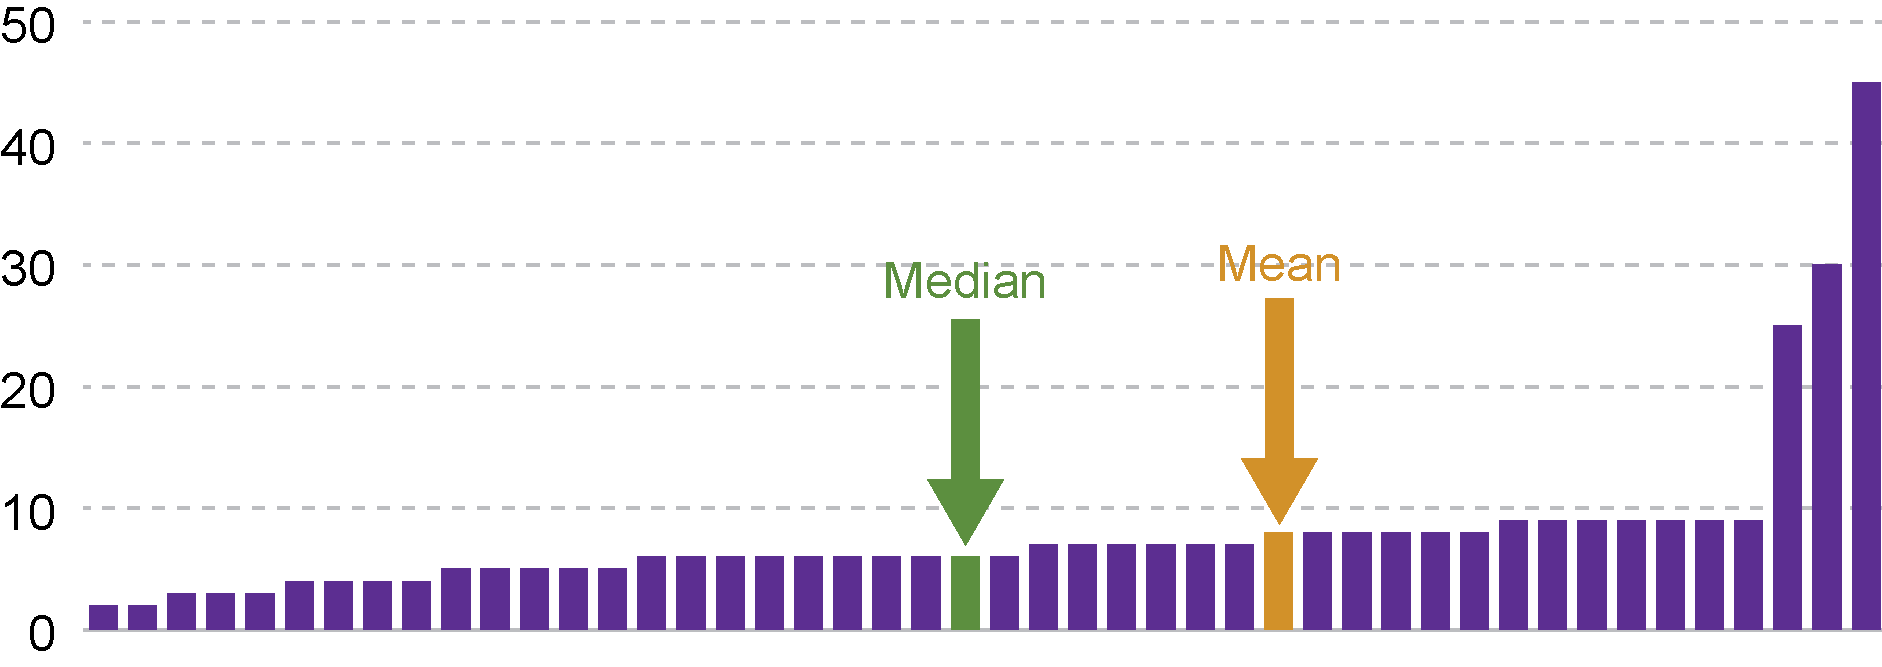 Comparison of the median and mean value for a set of numbers.